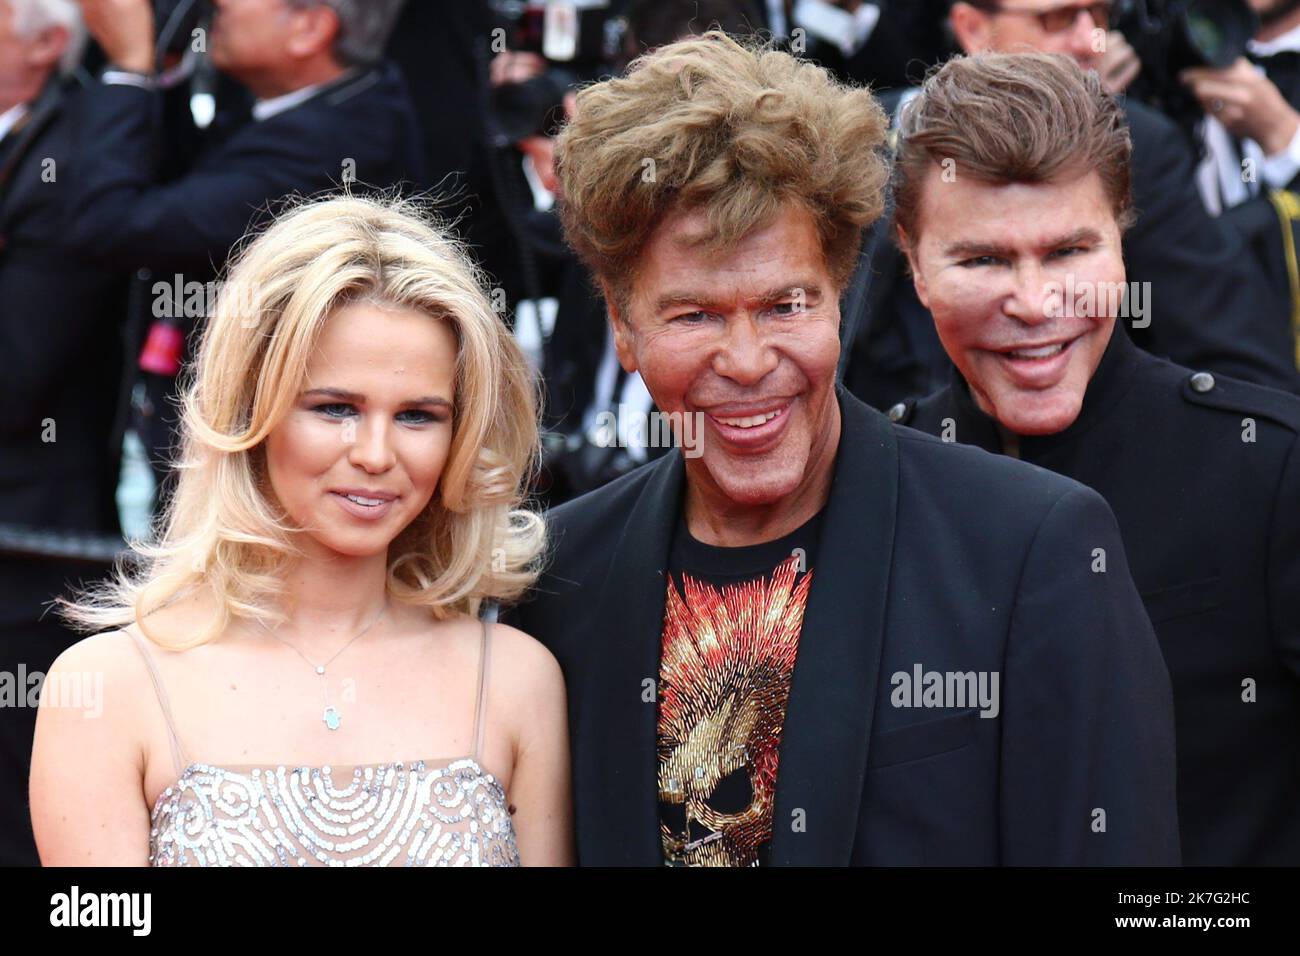 ©Pierre Teyssot/MAXPPP ; FILE PICTURE - Cannes Film Festival 2018 - 71st edition - Day 8 - May 15 in Cannes, on May 15, 2018; Screening of 'Solo: A star Wars Story; Grichka Bogdanoff is died on the 28th of December 201, in Paris at the age of 72, probably from Covid-19. On the red carpet, posing for photographer, Julie Jardon, Grichka Bogdanoff (center) and left his brother Igor Bogdanoff. Â© Pierre Teyssot / Maxppp  Stock Photo